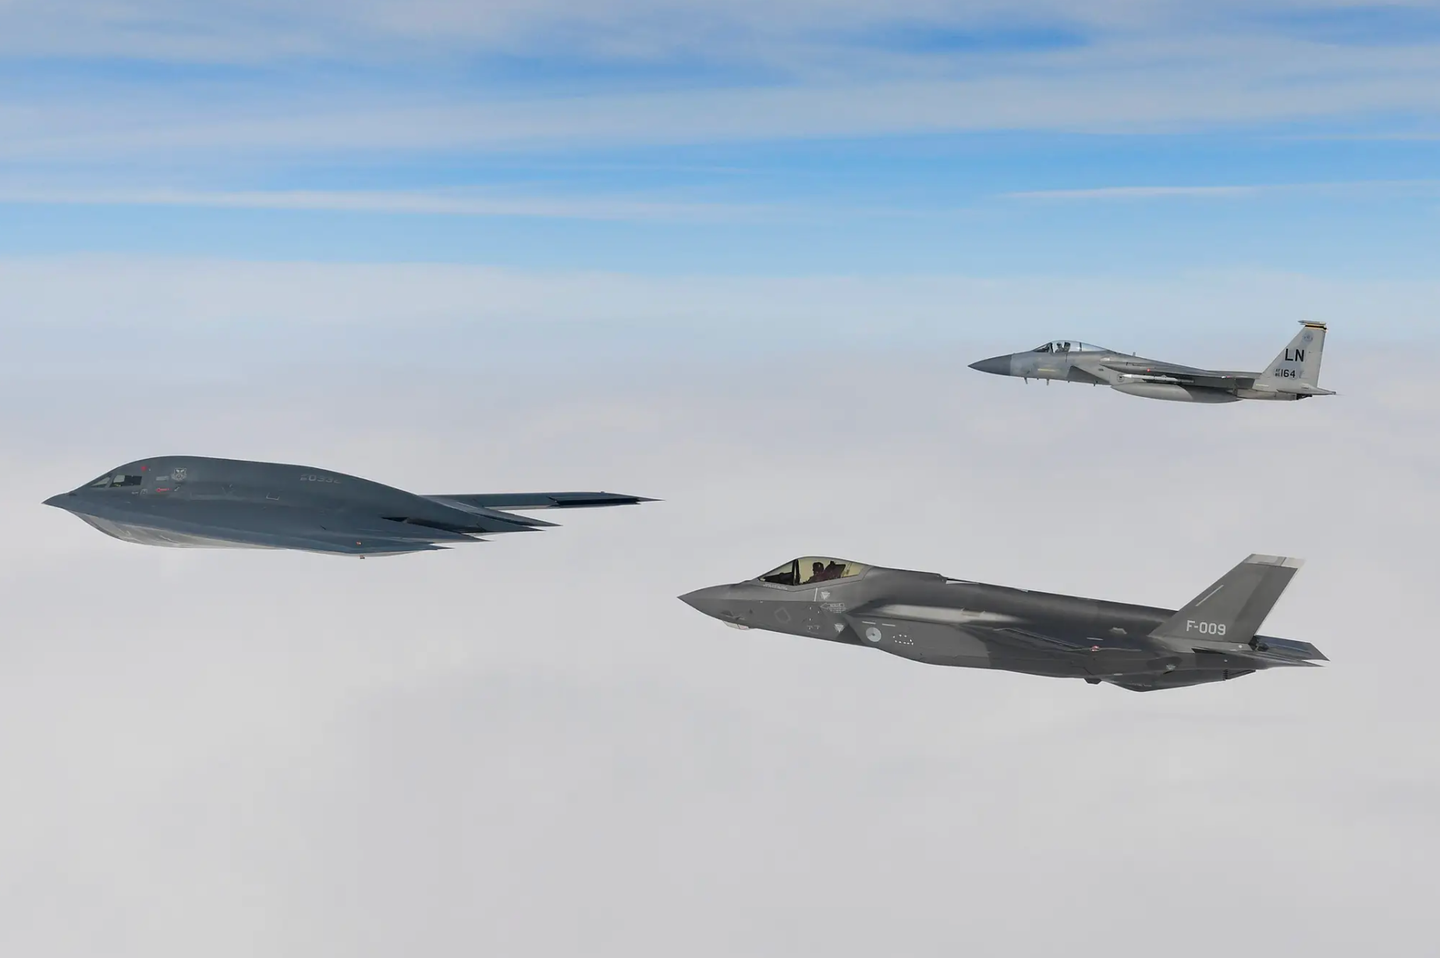 A B-2A Spirit bomber assigned to the 509th Bomb Wing, a Royal Netherlands Air Force F-35A, and a U.S. Air Force F-15C Eagle assigned to the 48th Fighter Wing, conduct aerial operations in support of Bomber Task Force Europe 20-2 over the North Sea March 18, 2020.&nbsp;<em>U.S. Air Force photo/Master Sgt. Matthew Plew</em>